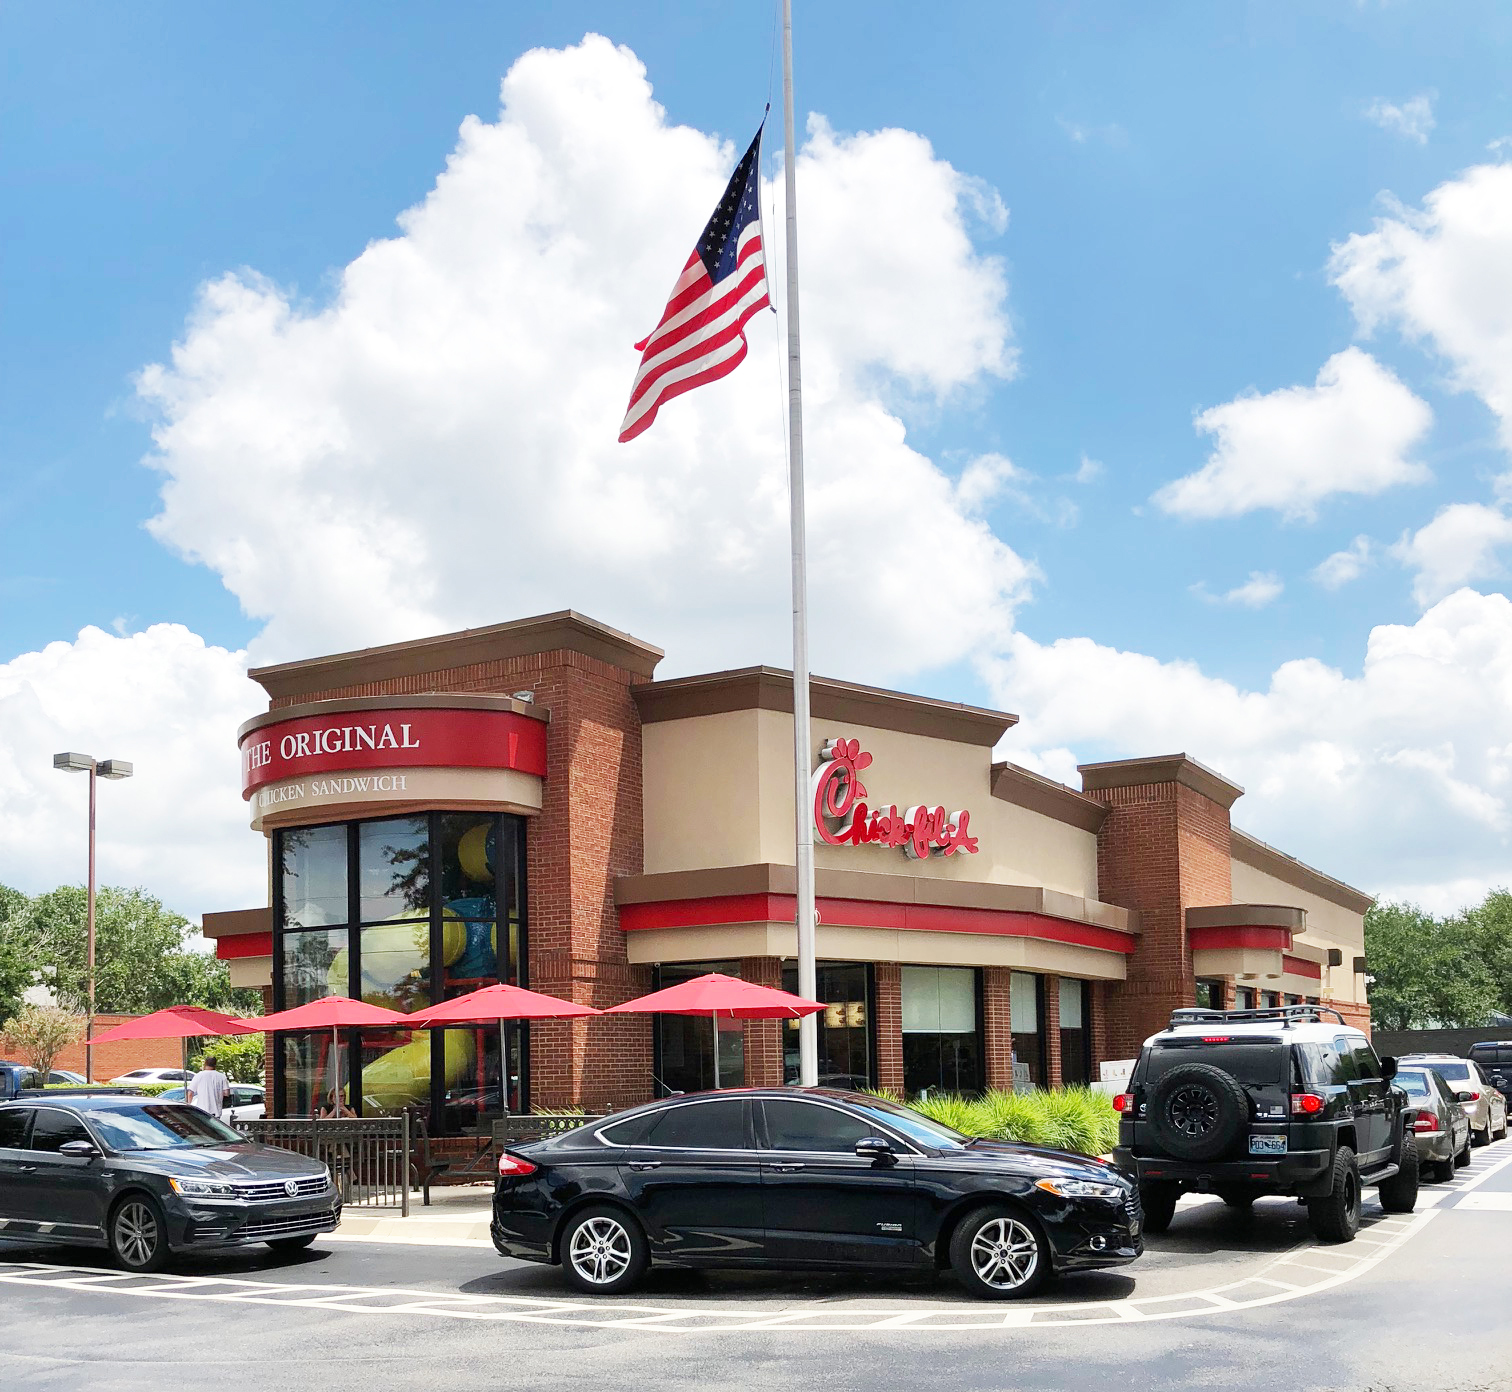 The almost 4,300-square-foot Chick-fil-A restaurant was built in 2000 at 4461 Southside Blvd.